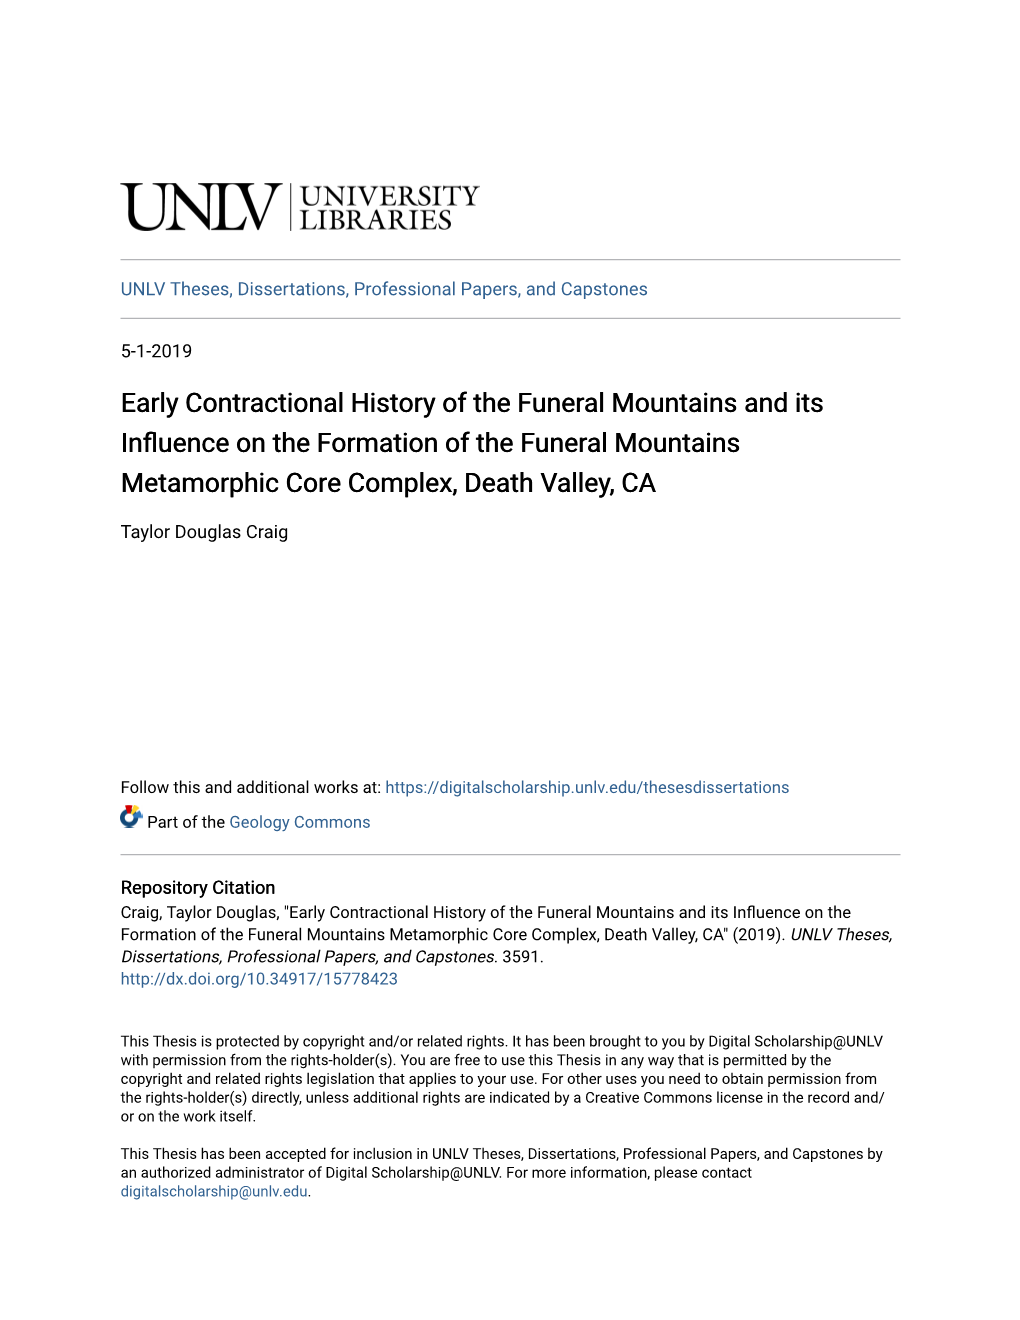 Early Contractional History of the Funeral Mountains and Its Influence on the Ormationf of the Funeral Mountains Metamorphic Core Complex, Death Valley, CA